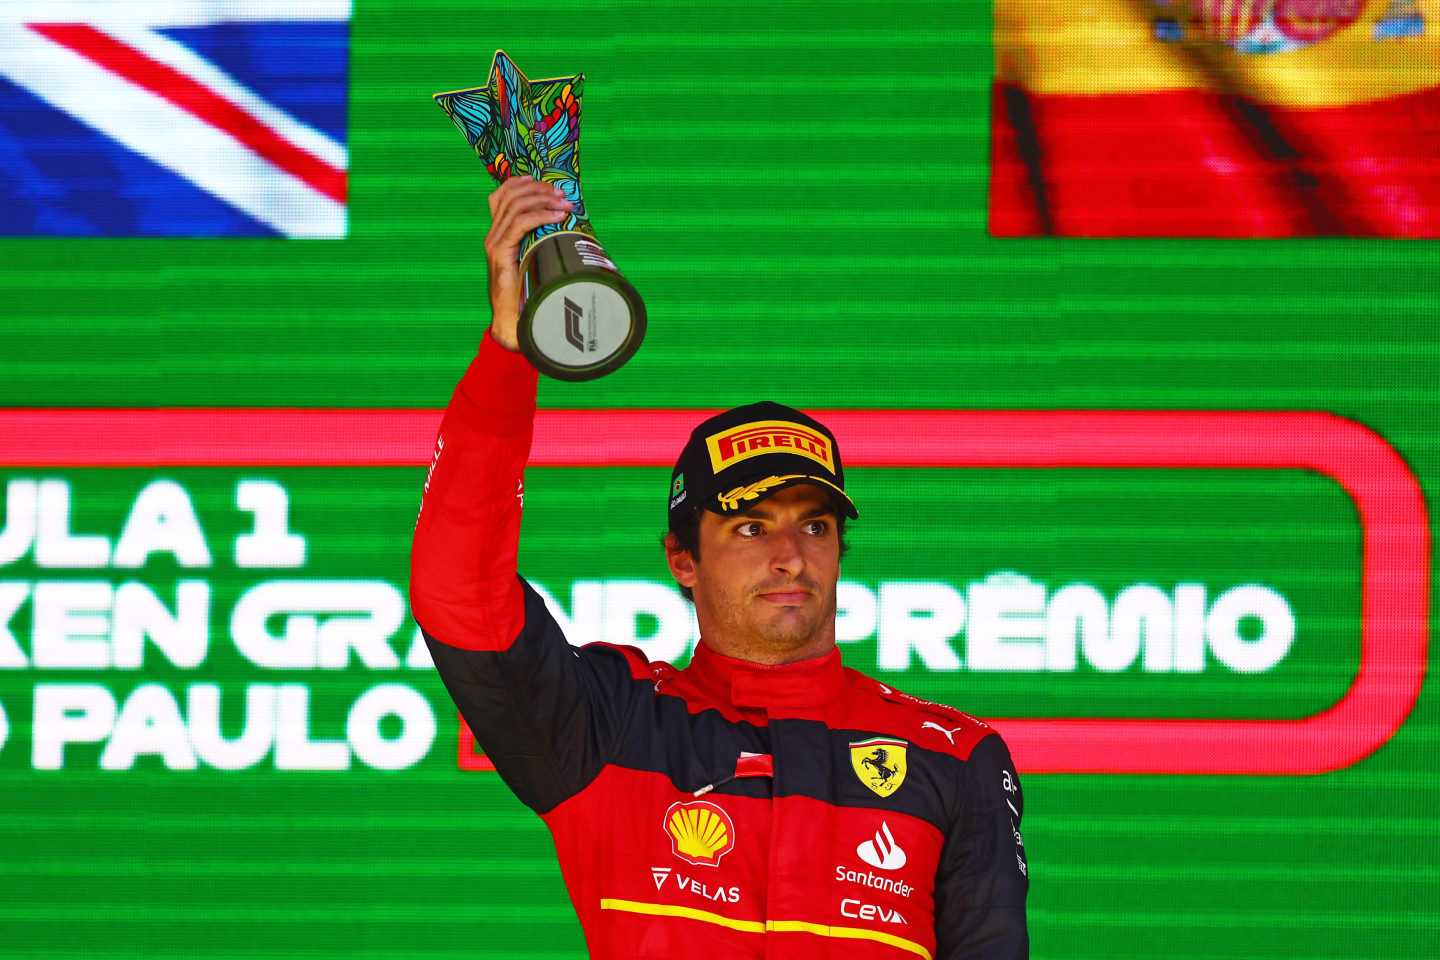 SAO PAULO, BRAZIL - NOVEMBER 13: Third placed Carlos Sainz of Spain and Ferrari celebrates on the podium during the F1 Grand Prix of Brazil at Autodromo Jose Carlos Pace on November 13, 2022 in Sao Paulo, Brazil. (Photo by Mark Thompson/Getty Images)